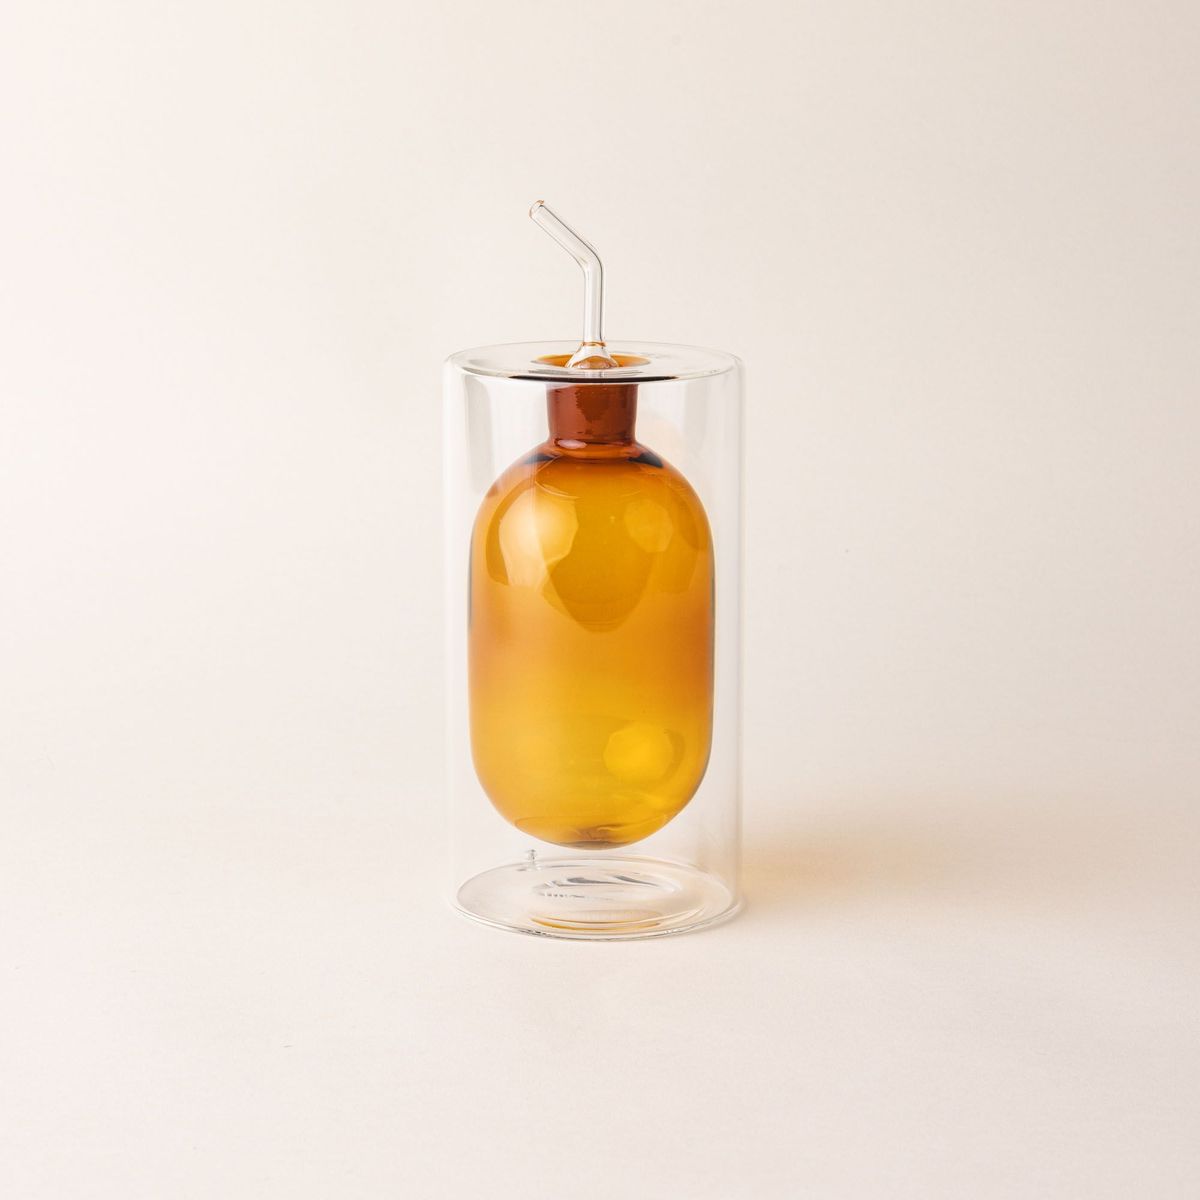 An artful glass cruets in a an orange color. There is a rounded bulb that acts as a container for the cruet, surrounded by a doubled glass wall.